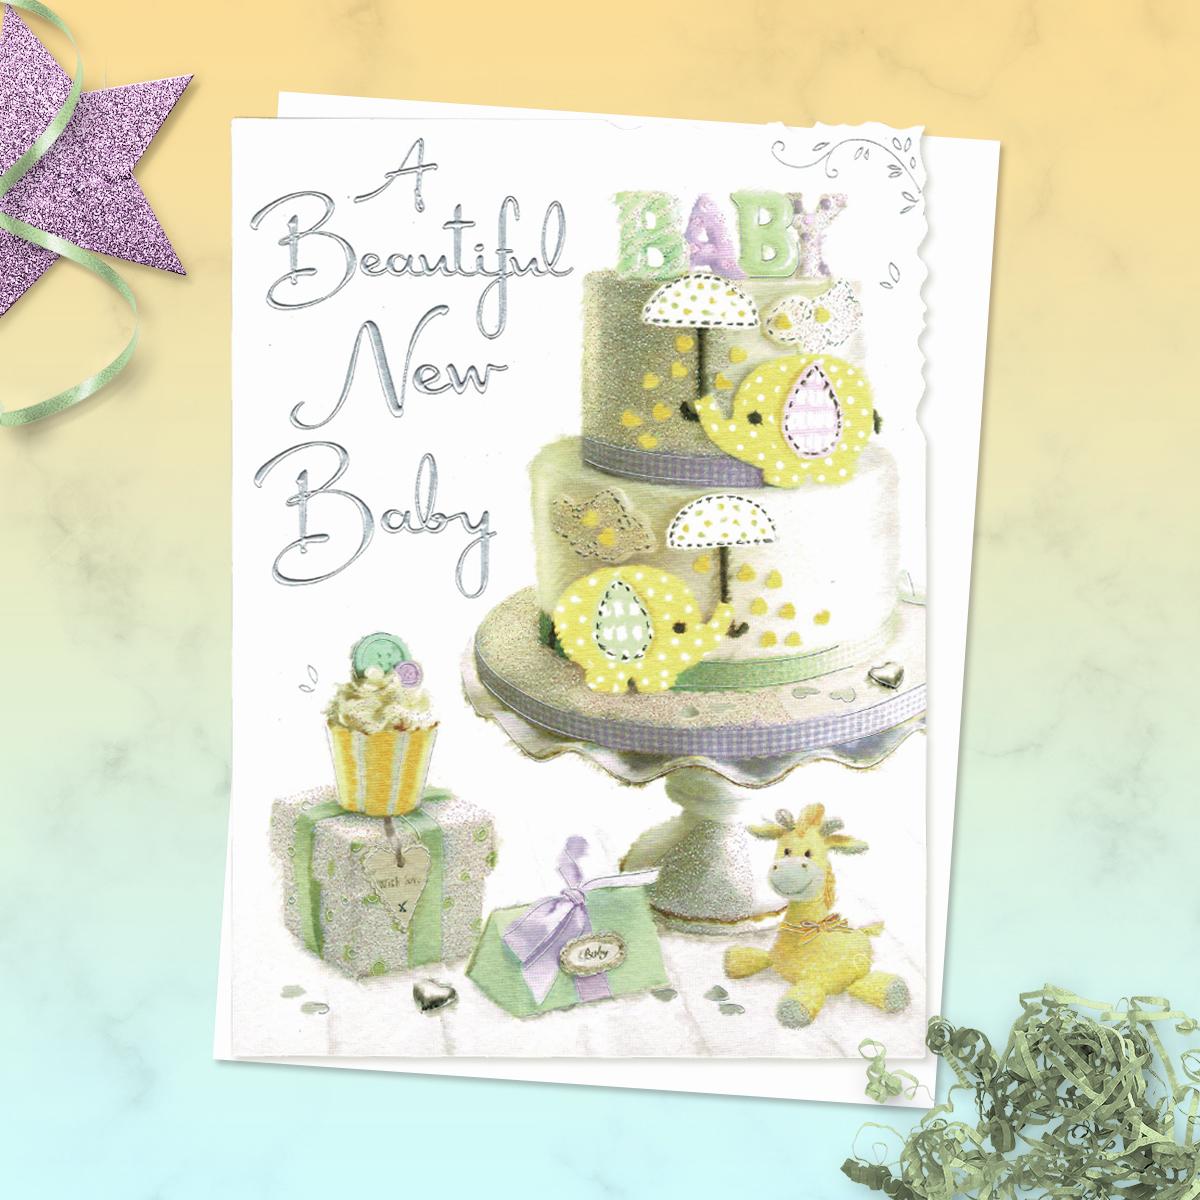 A Beautiful New Baby' Card Featuring A Two Tier Cake With Gifts And Soft Toy In Lemon And Pastel Green. With Added Sparkle And Silver Foil Detail. Complete With White Envelope